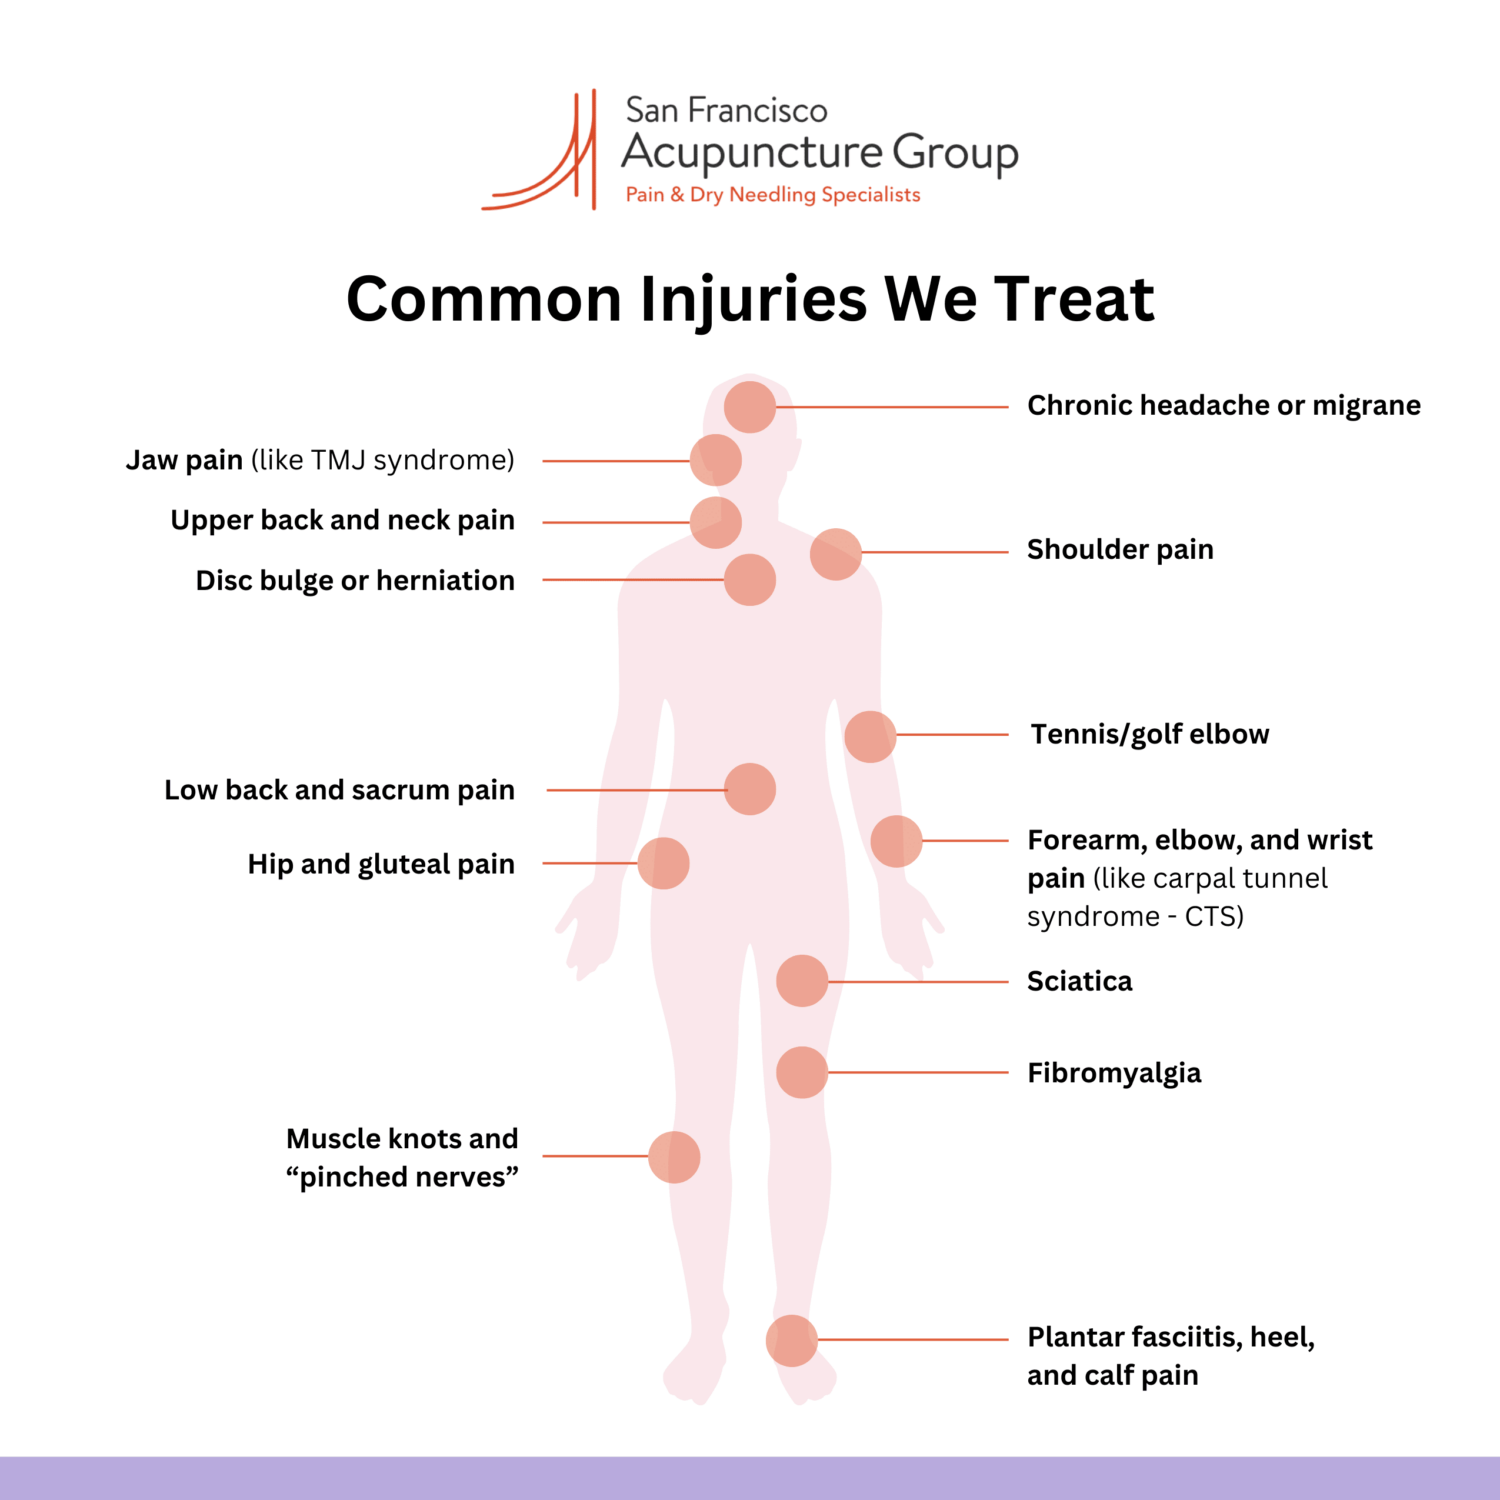 Infographic illustrating common injuries we treat: Muscle knots and “pinched nerves”, Upper back and neck pain, Jaw pain (like TMJ syndrome), Shoulder pain, Low back and sacrum pain, Disc bulge or herniation, Hip and gluteal pain, Forearm, elbow, and wrist pain (like carpal tunnel syndrome — CTS), Tennis/golf elbow, Plantar fasciitis, heel, and calf pain, Sciatica, Chronic headache or migraine, Fibromyalgia